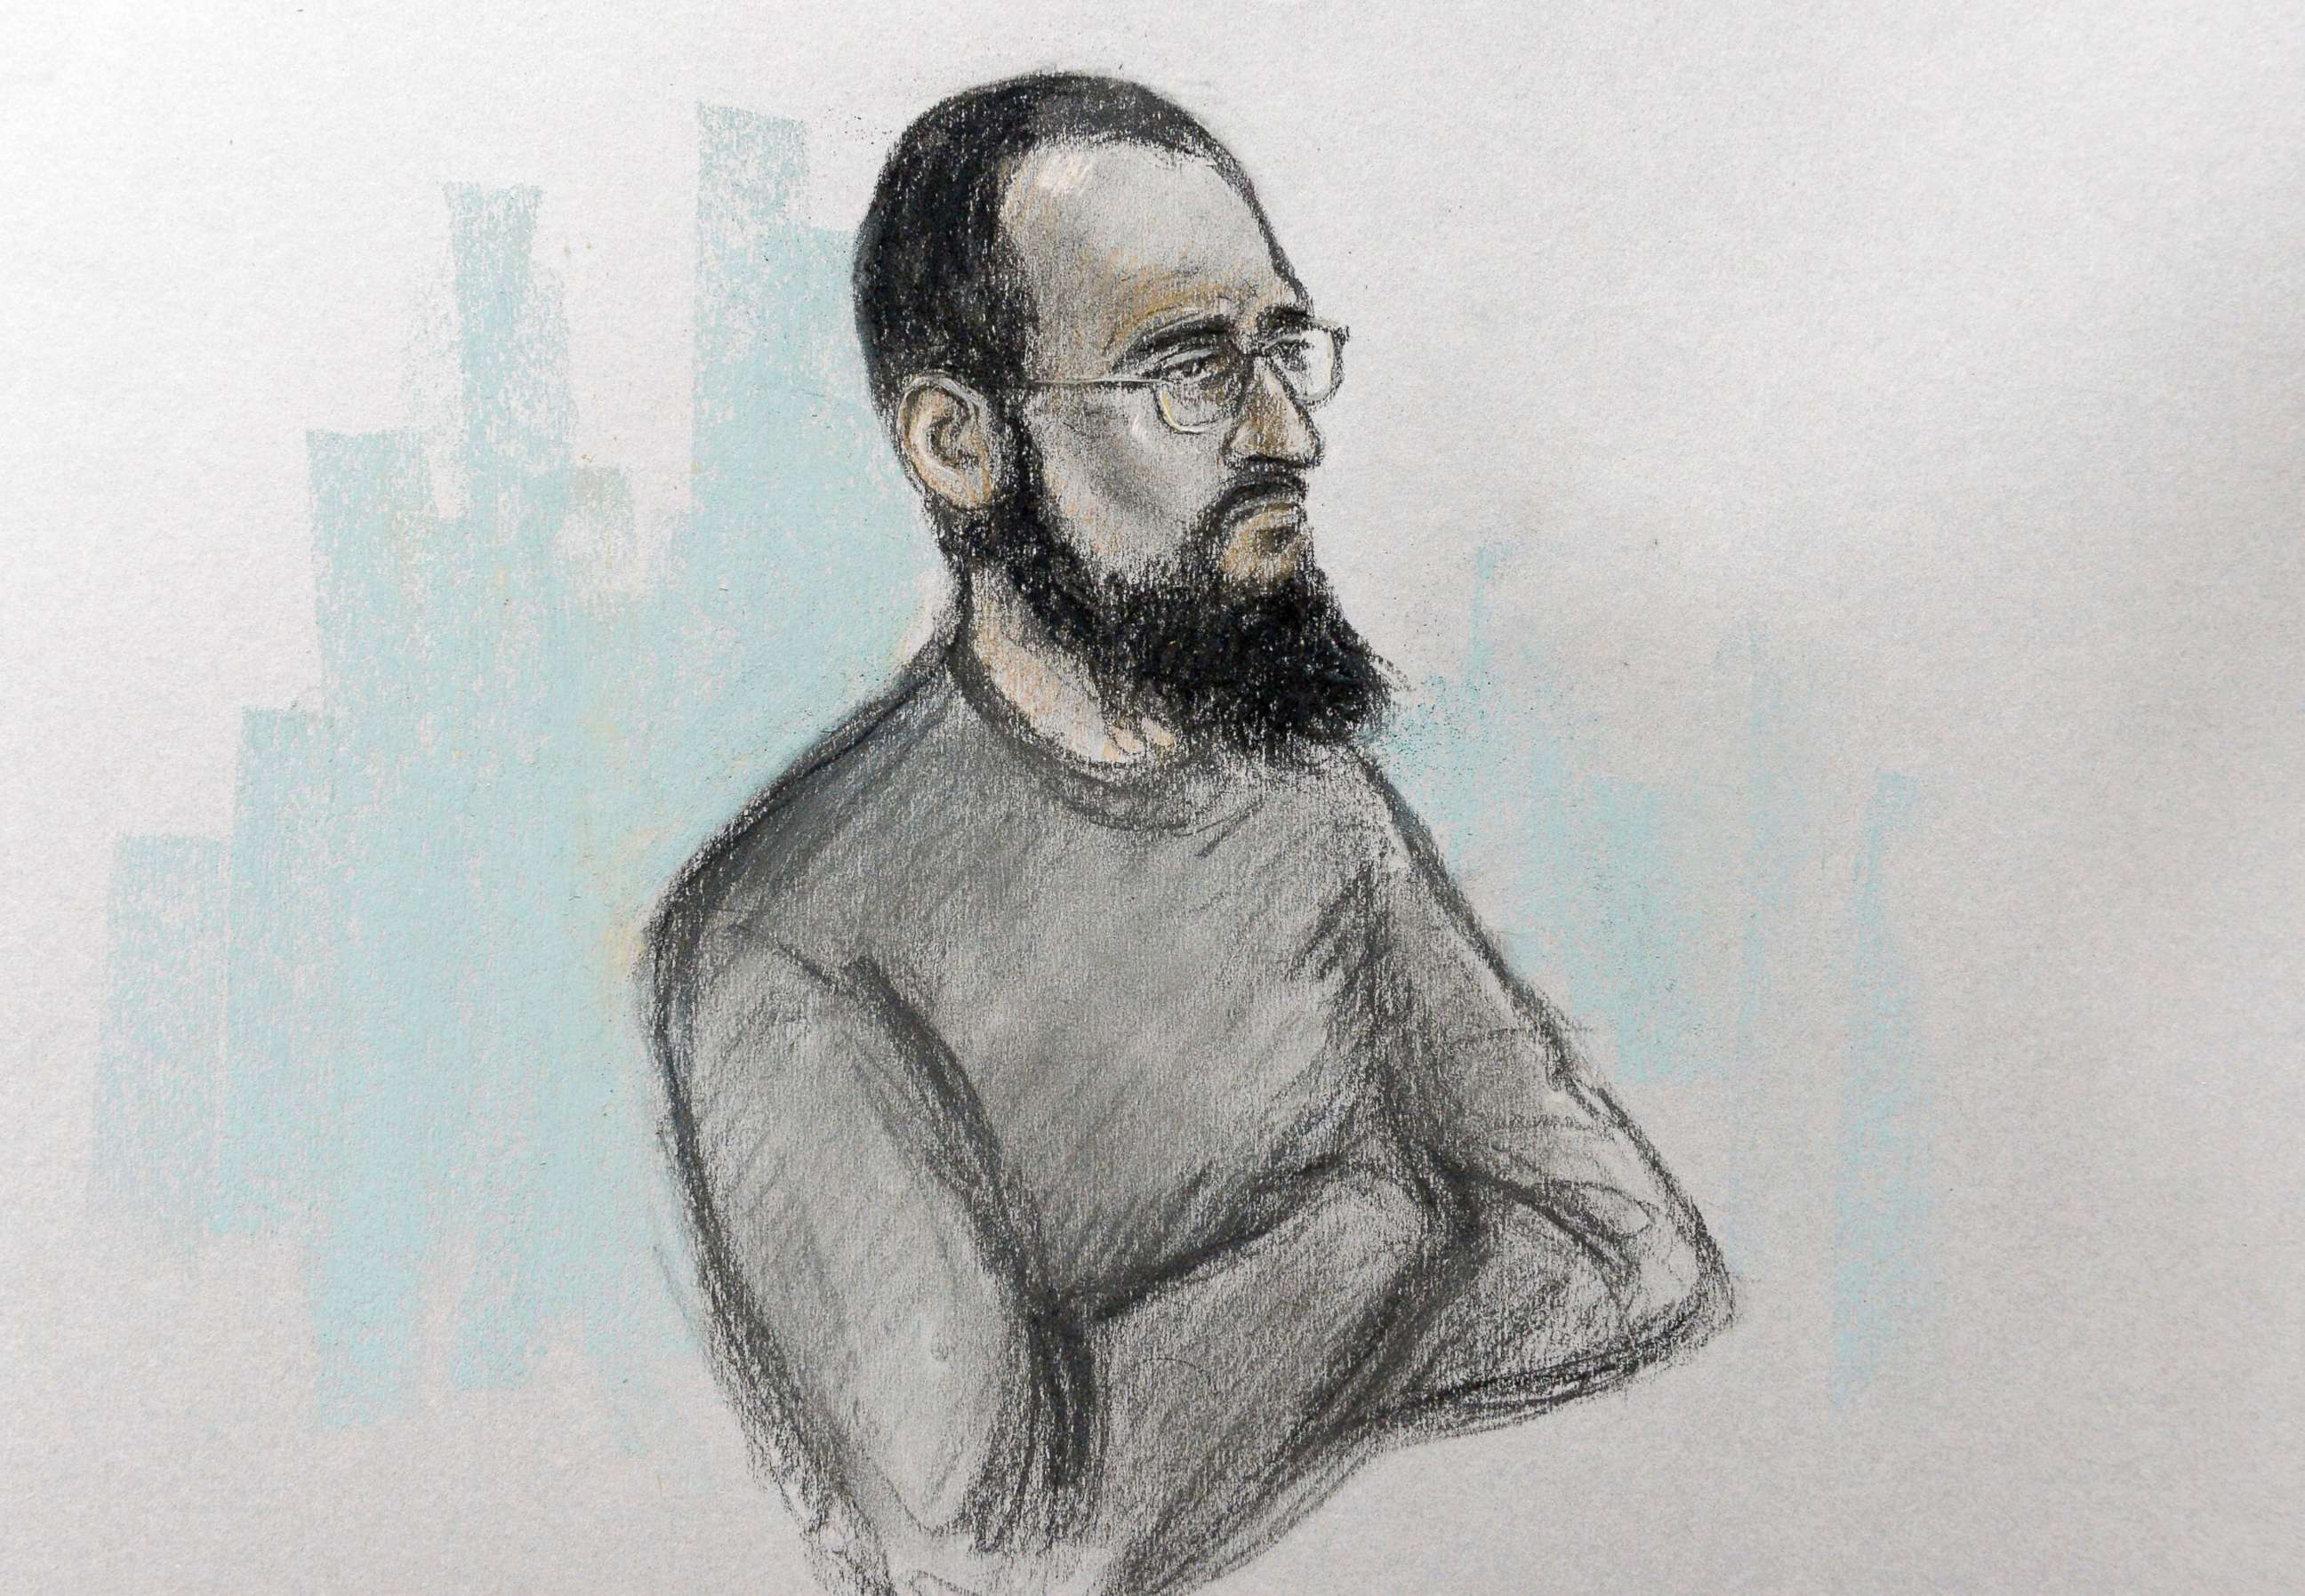 PHOTO: Court artist sketch by Elizabeth Cook of Husnain Rashid in the dock at Westminster Magistrates' Court in London, Dec. 6, 2017.